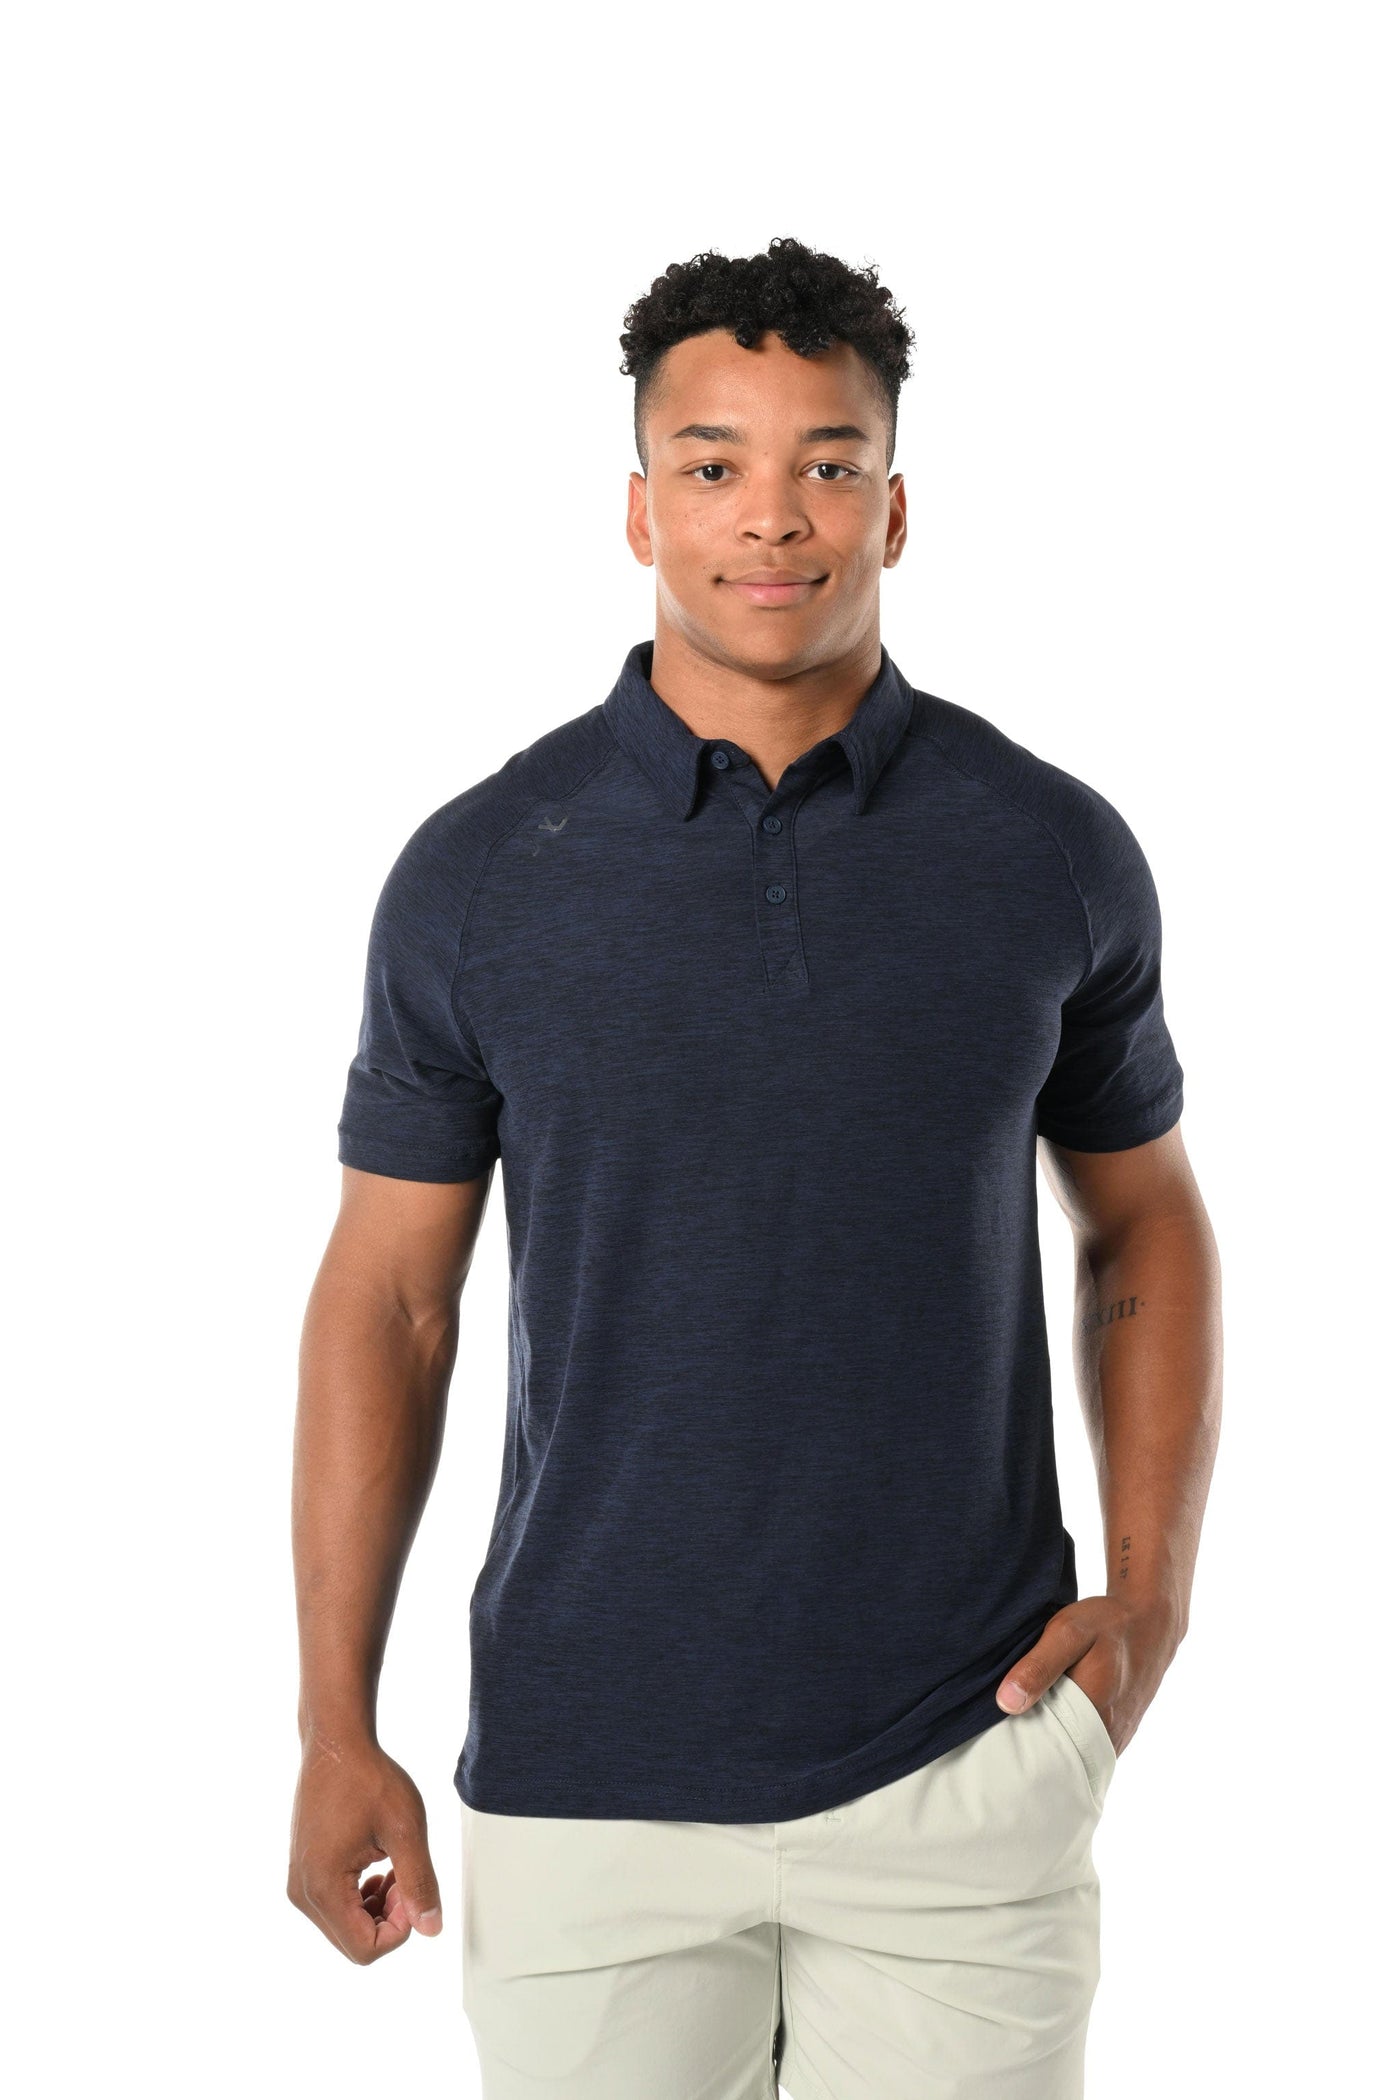 Bauer FLC Performance Mens Polo - Navy - The Hockey Shop Source For Sports